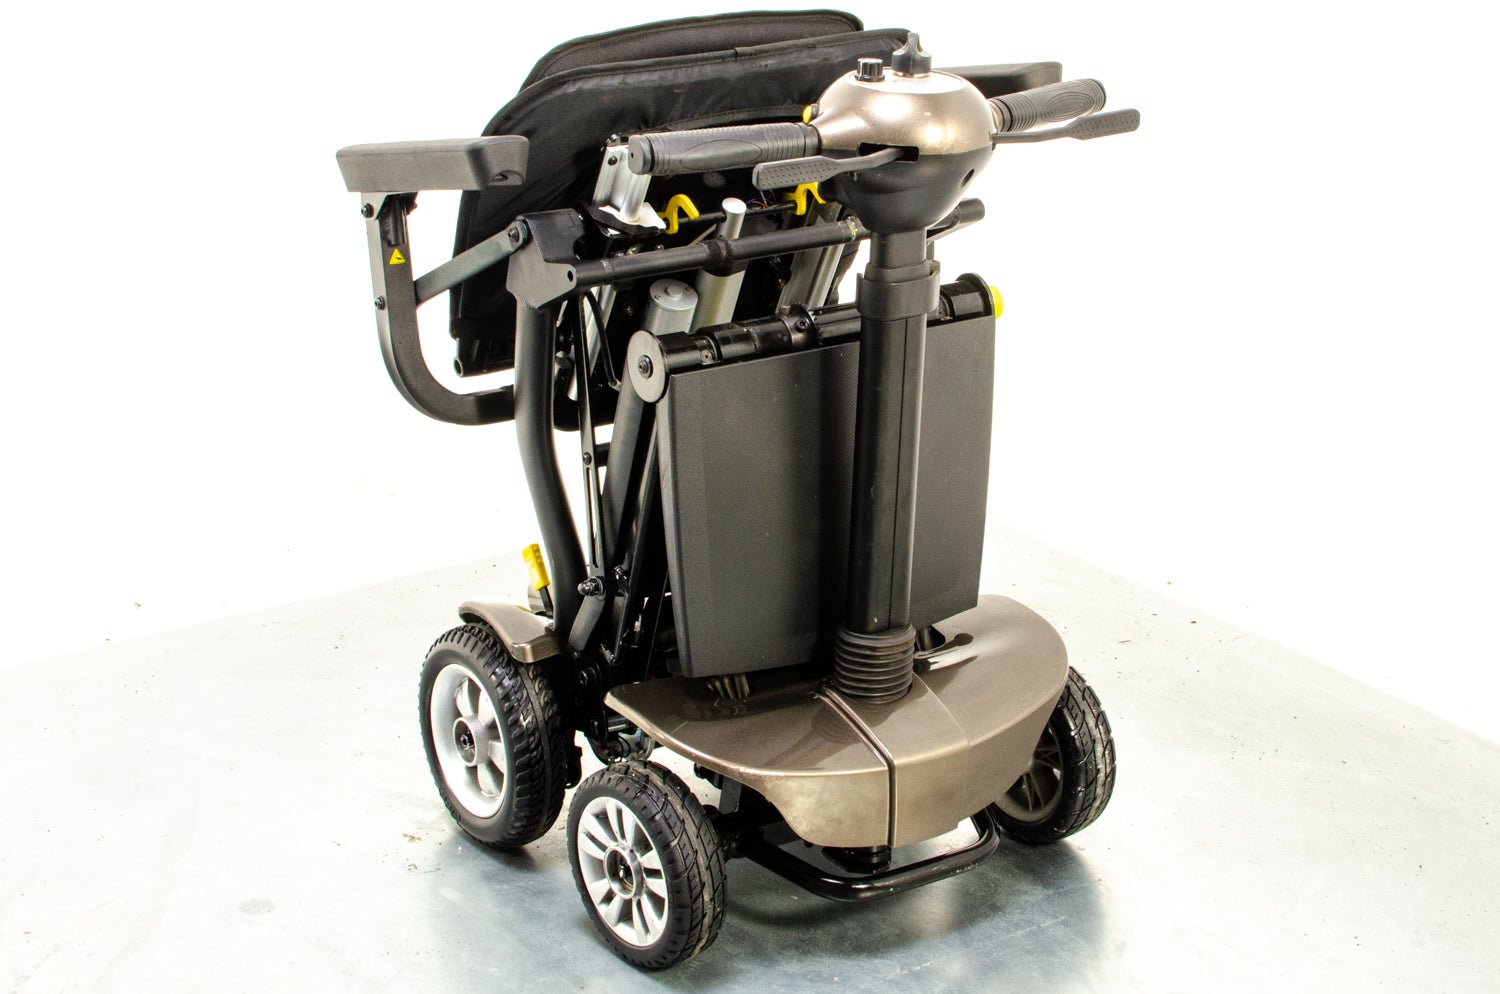 Globetrotter Used Mobility Scooter Remote Folding Lithium Lightweight eDrive grey 13197